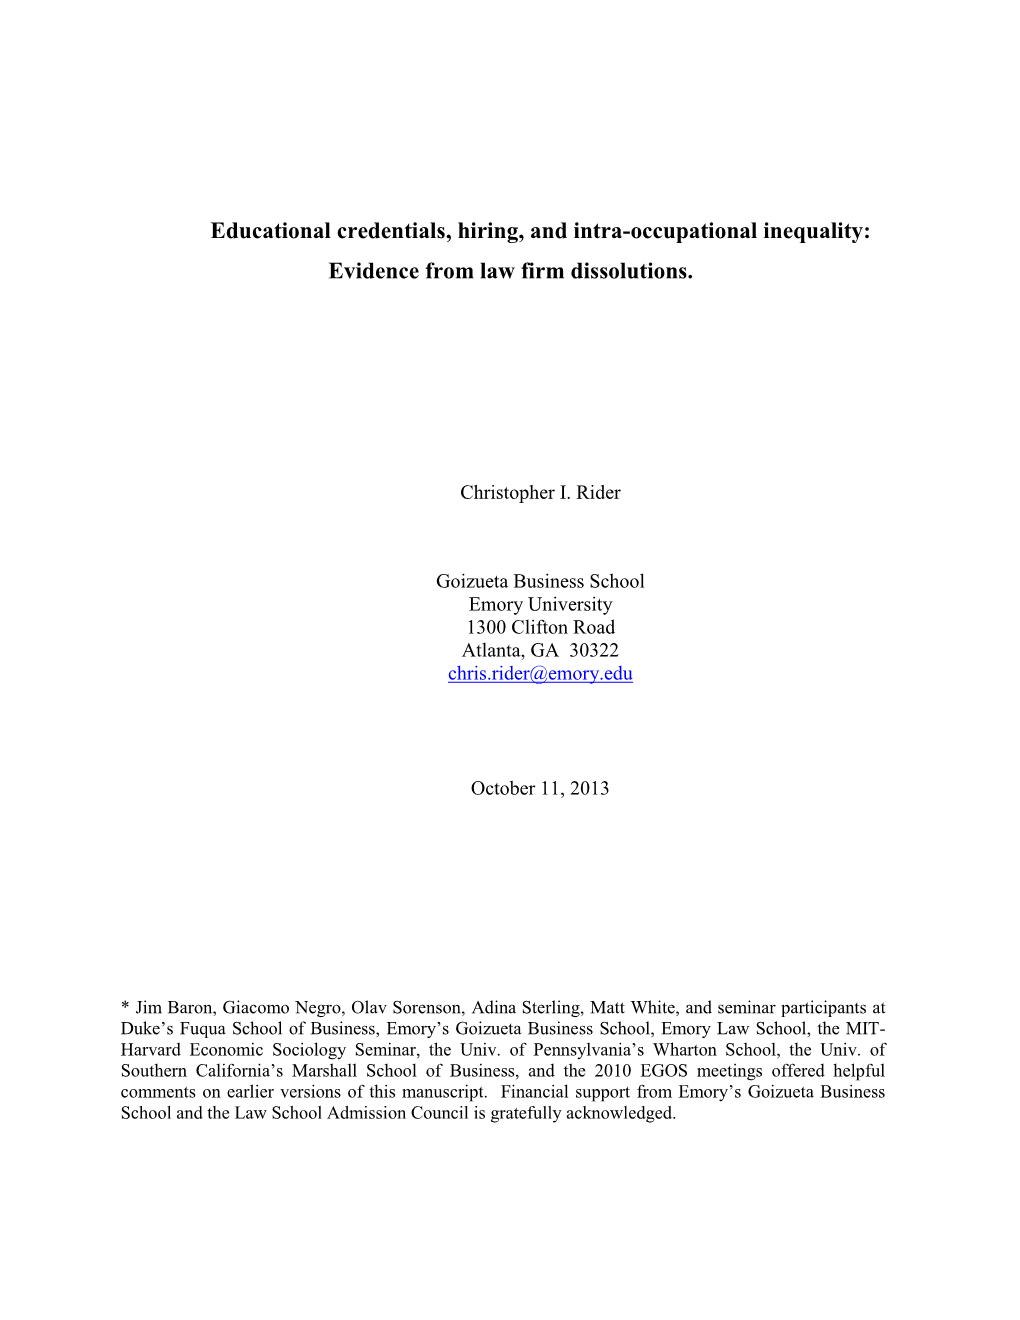 Educational Credentials, Hiring, and Intra-Occupational Inequality: Evidence from Law Firm Dissolutions